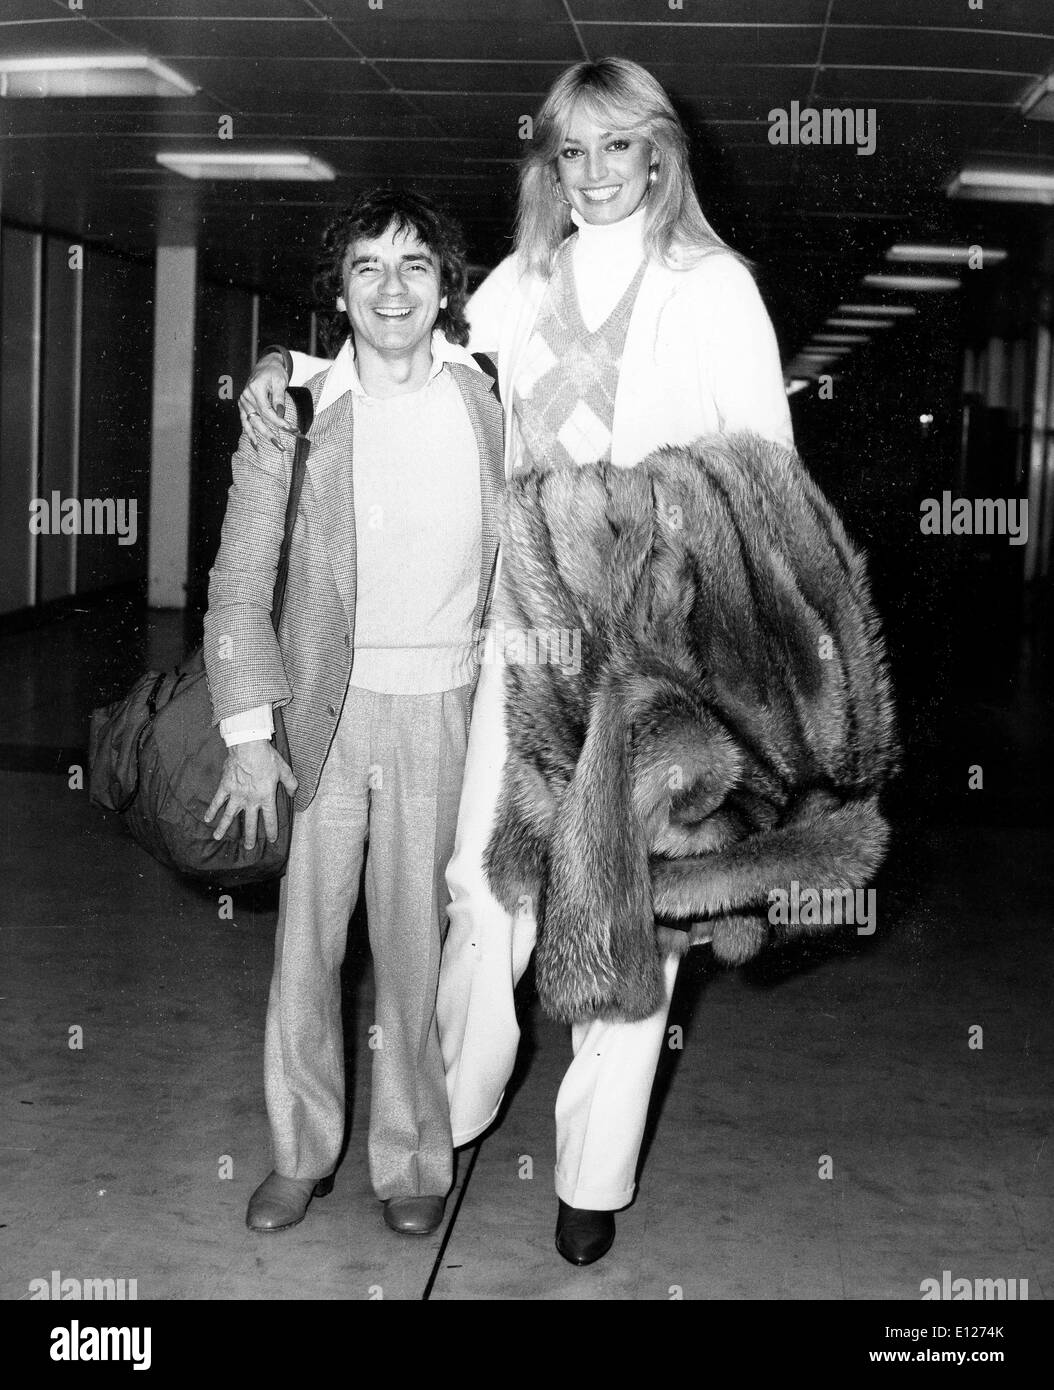 Apr 01, 2009 - London, England, United Kingdom - DUDLEY MOORE and SUZY KENDALL .co Stock Photo